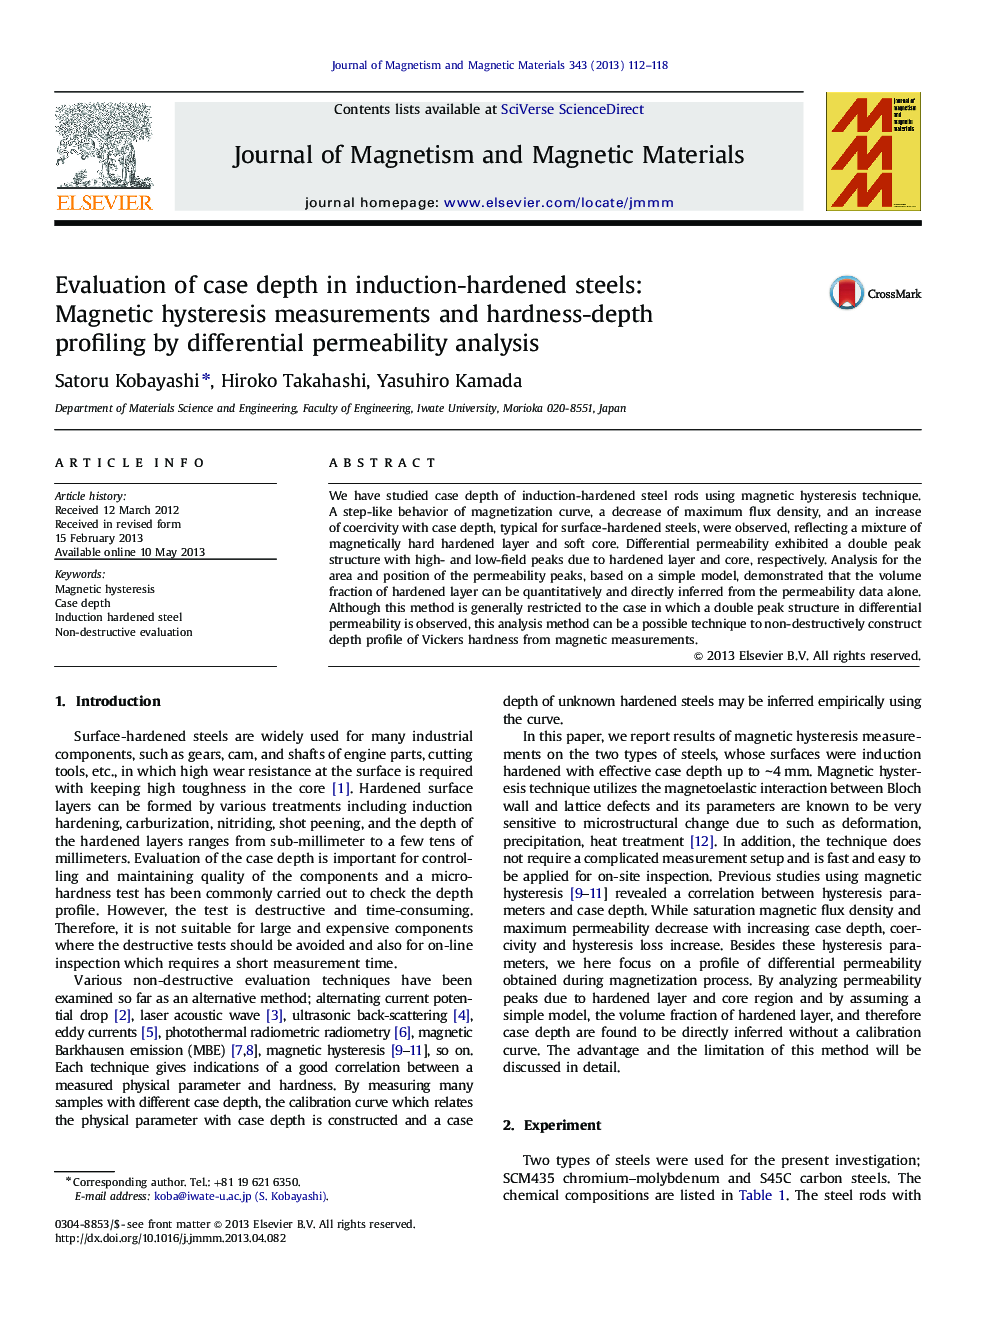 Evaluation of case depth in induction-hardened steels: Magnetic hysteresis measurements and hardness-depth profiling by differential permeability analysis